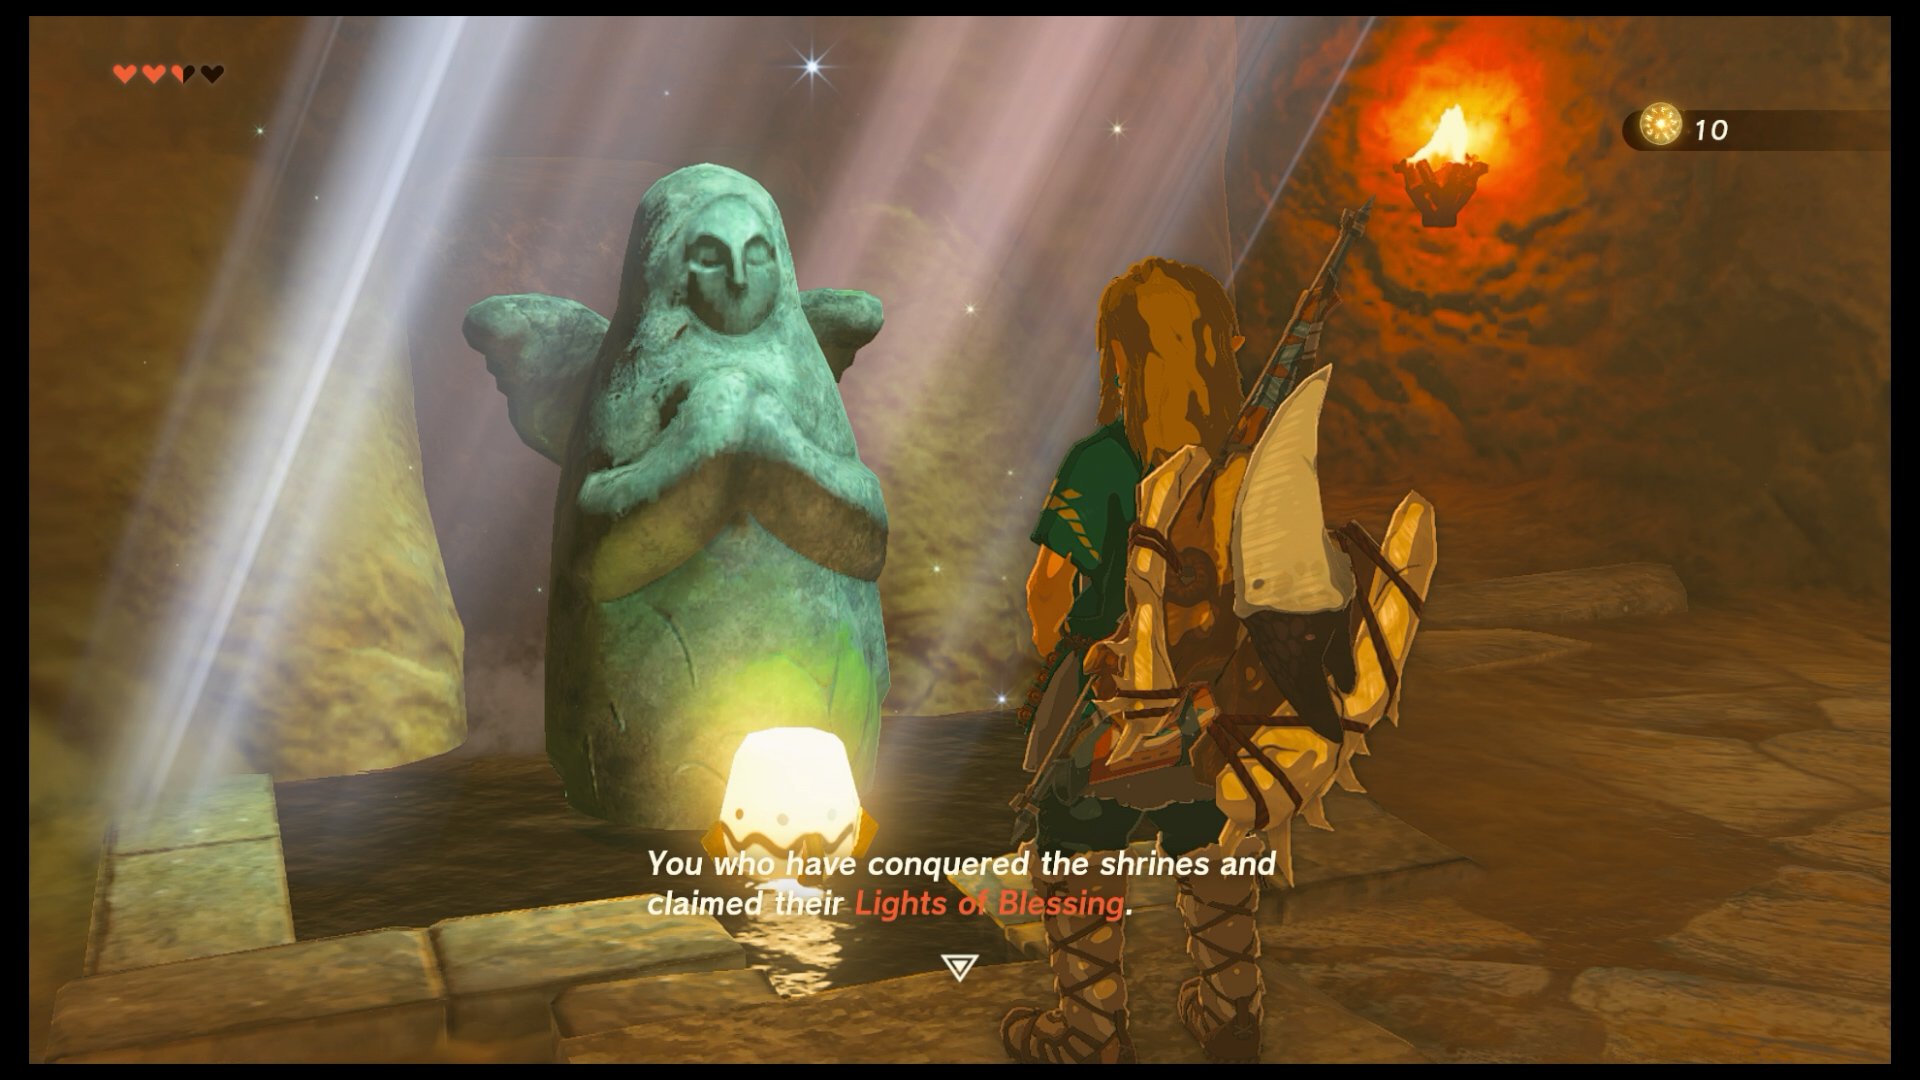 Zelda: Tears Of The Kingdom: Beginner's Tips and Game guide